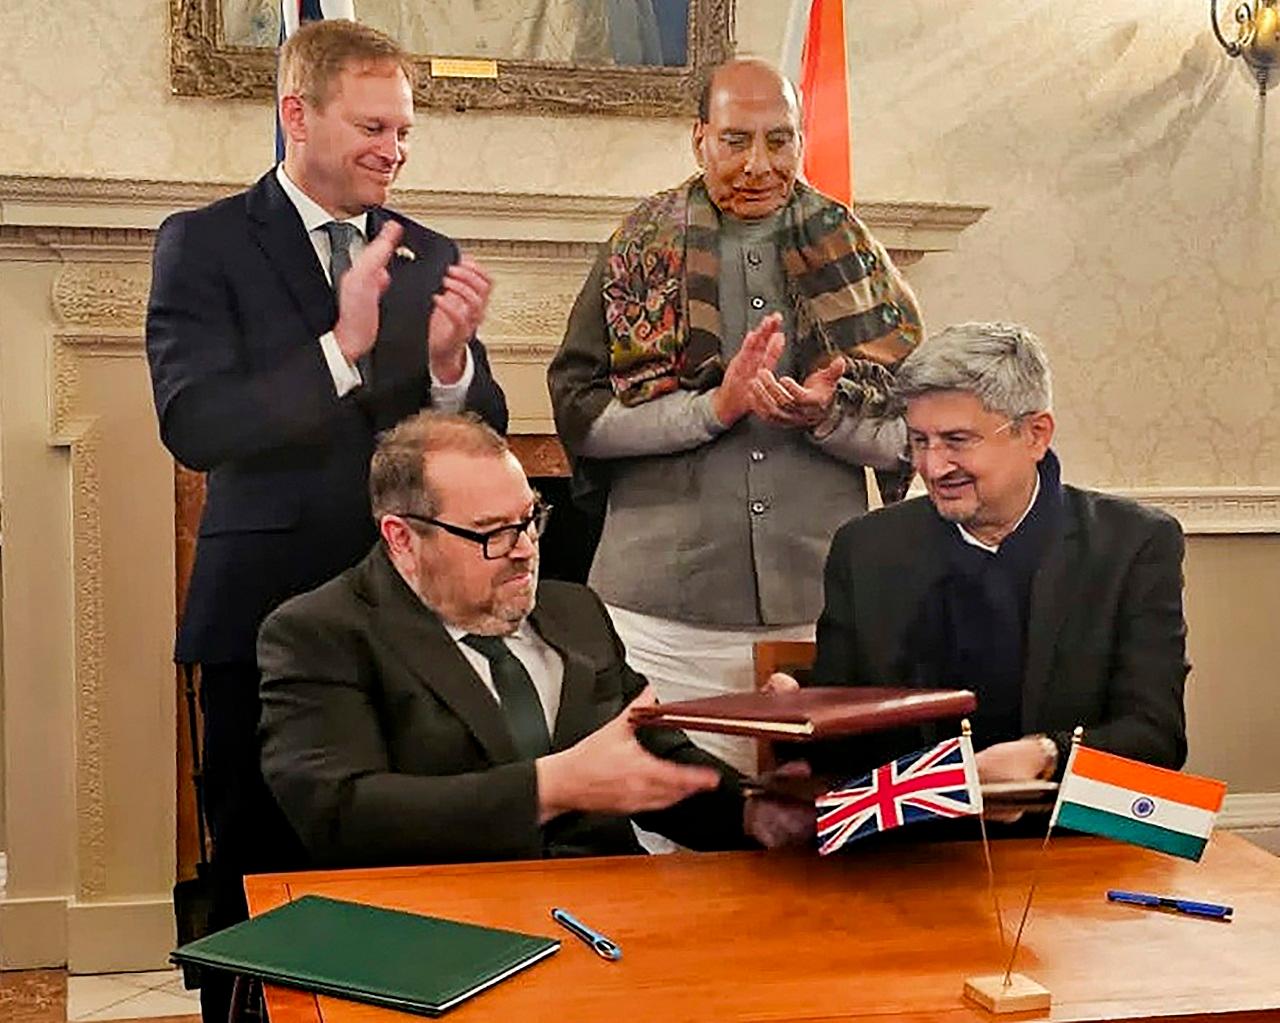 During the meeting, Shapps stressed that the India-UK relationship is not transactional, instead both countries are natural partners with many commonalities and shared goals